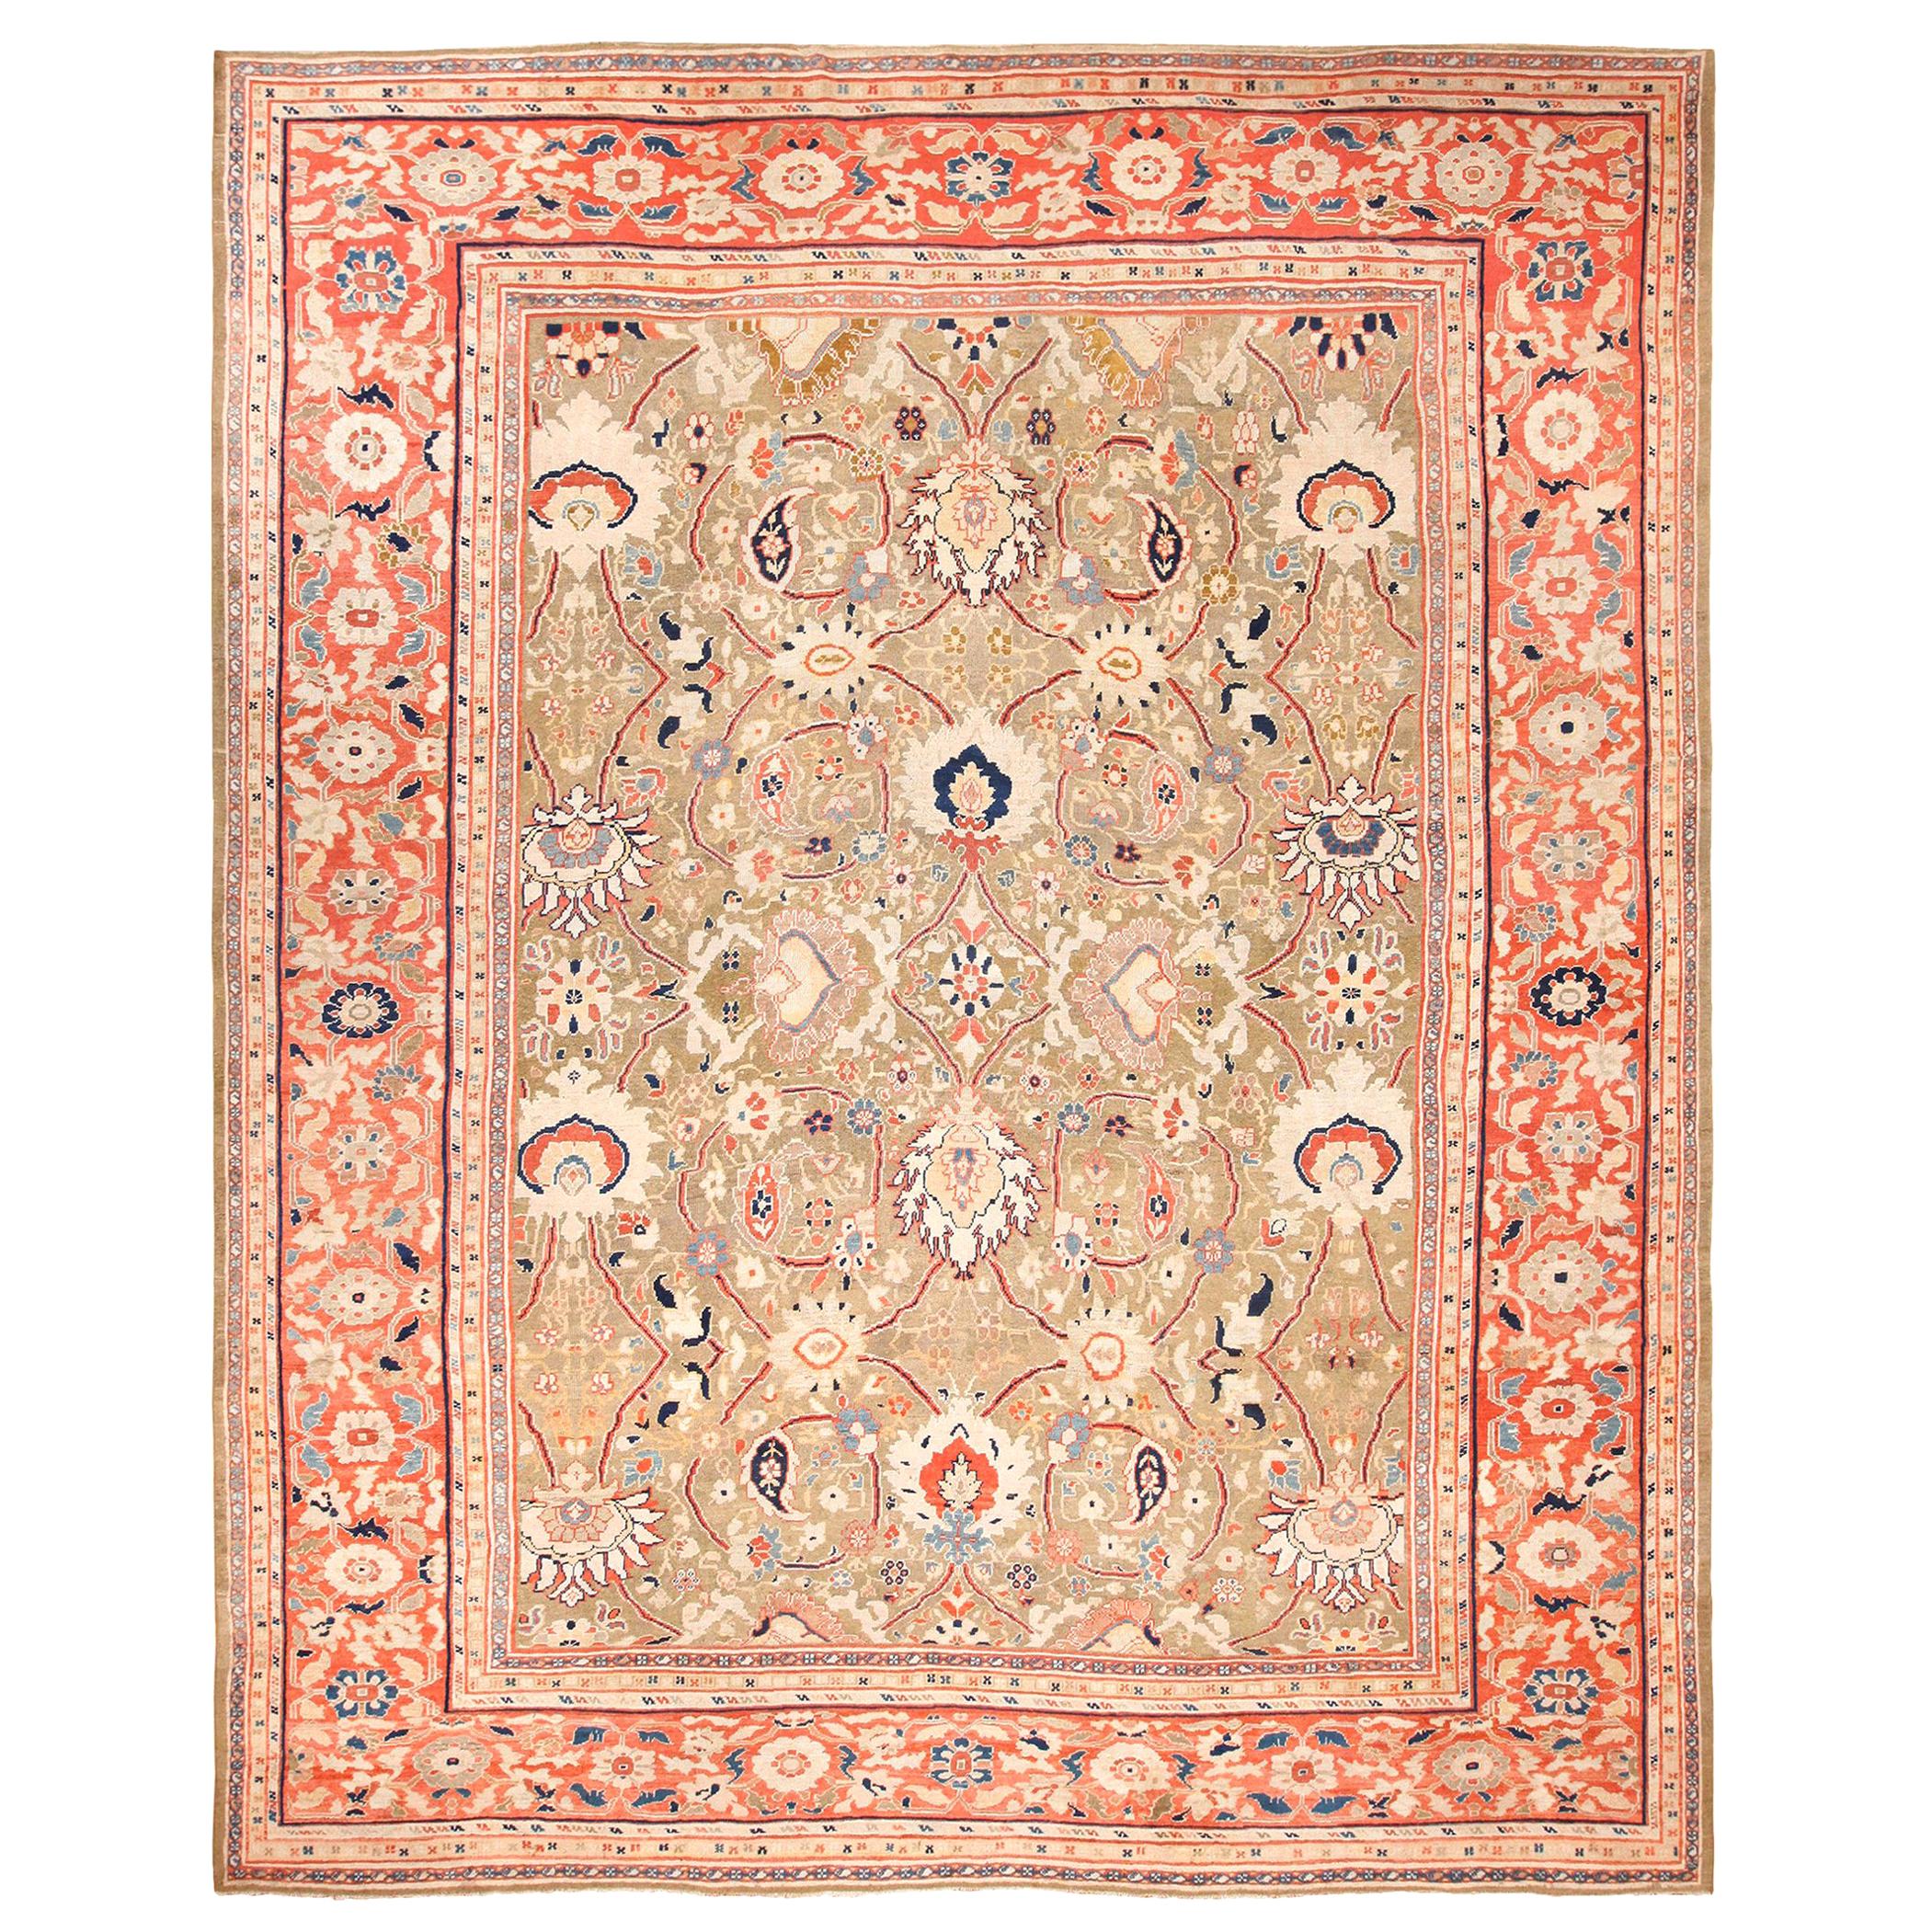 What is a Ziegler rug?